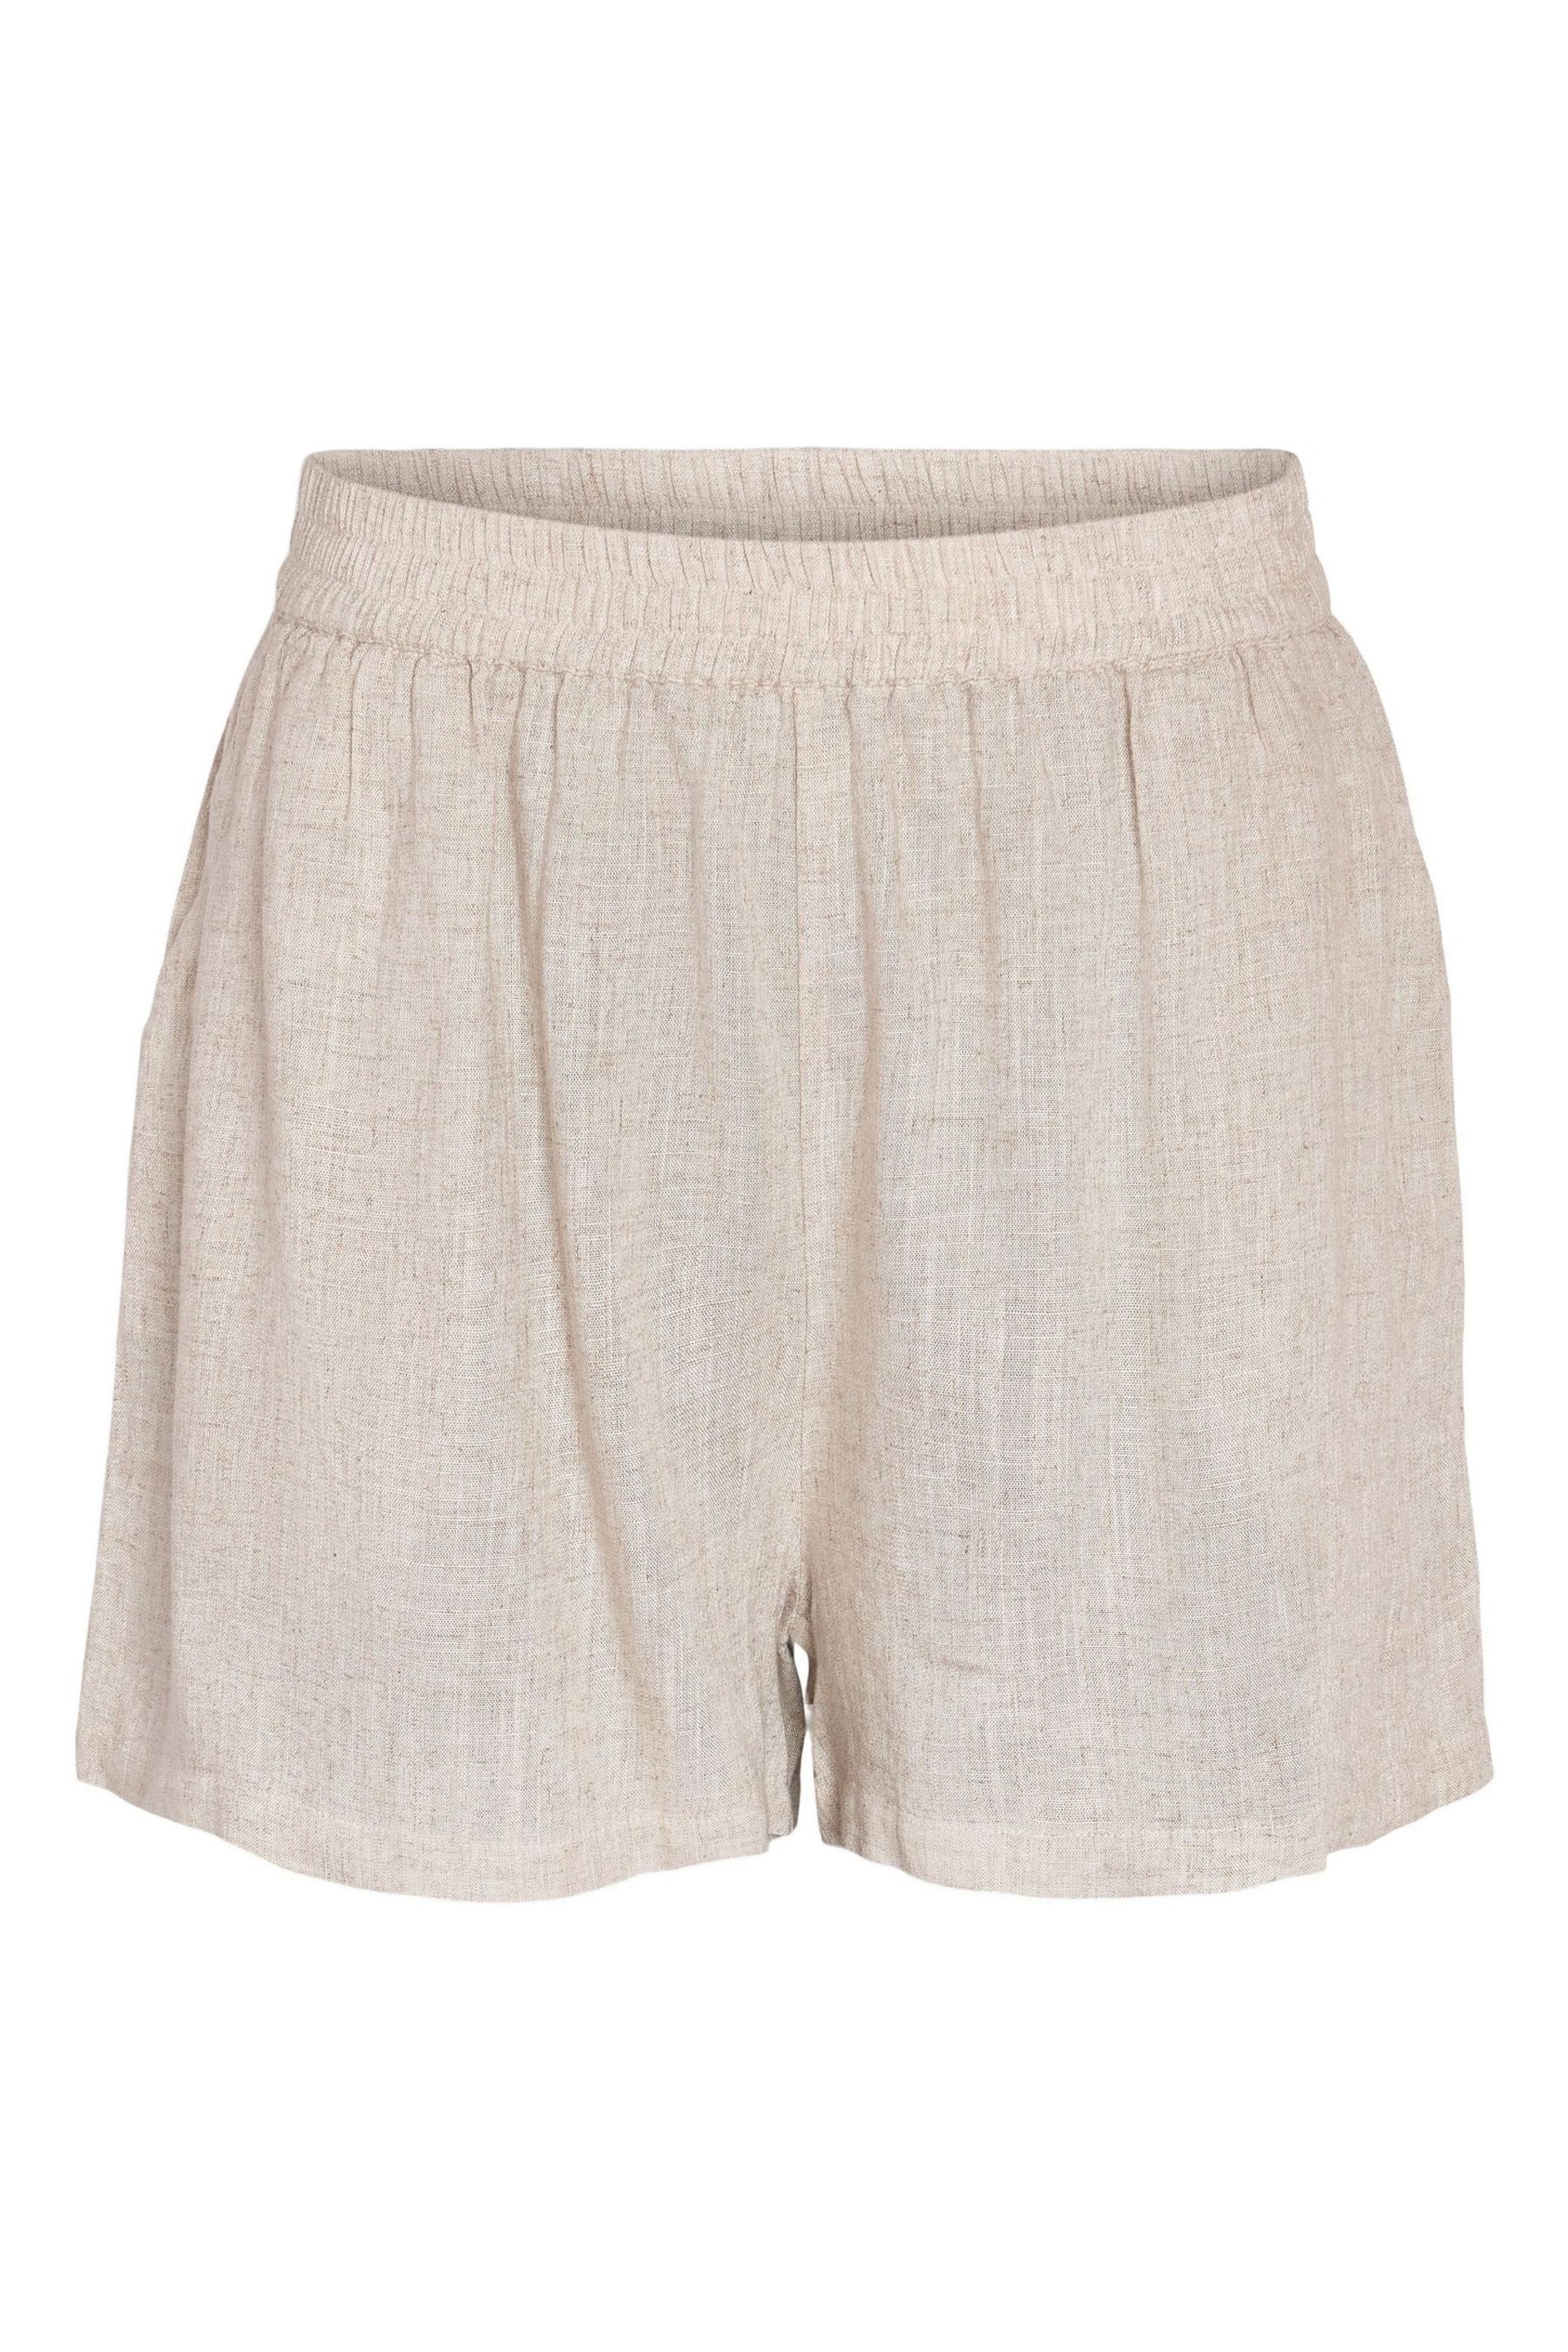 NOISY MAY Brown Linen Blend Shorts - Image 6 of 6